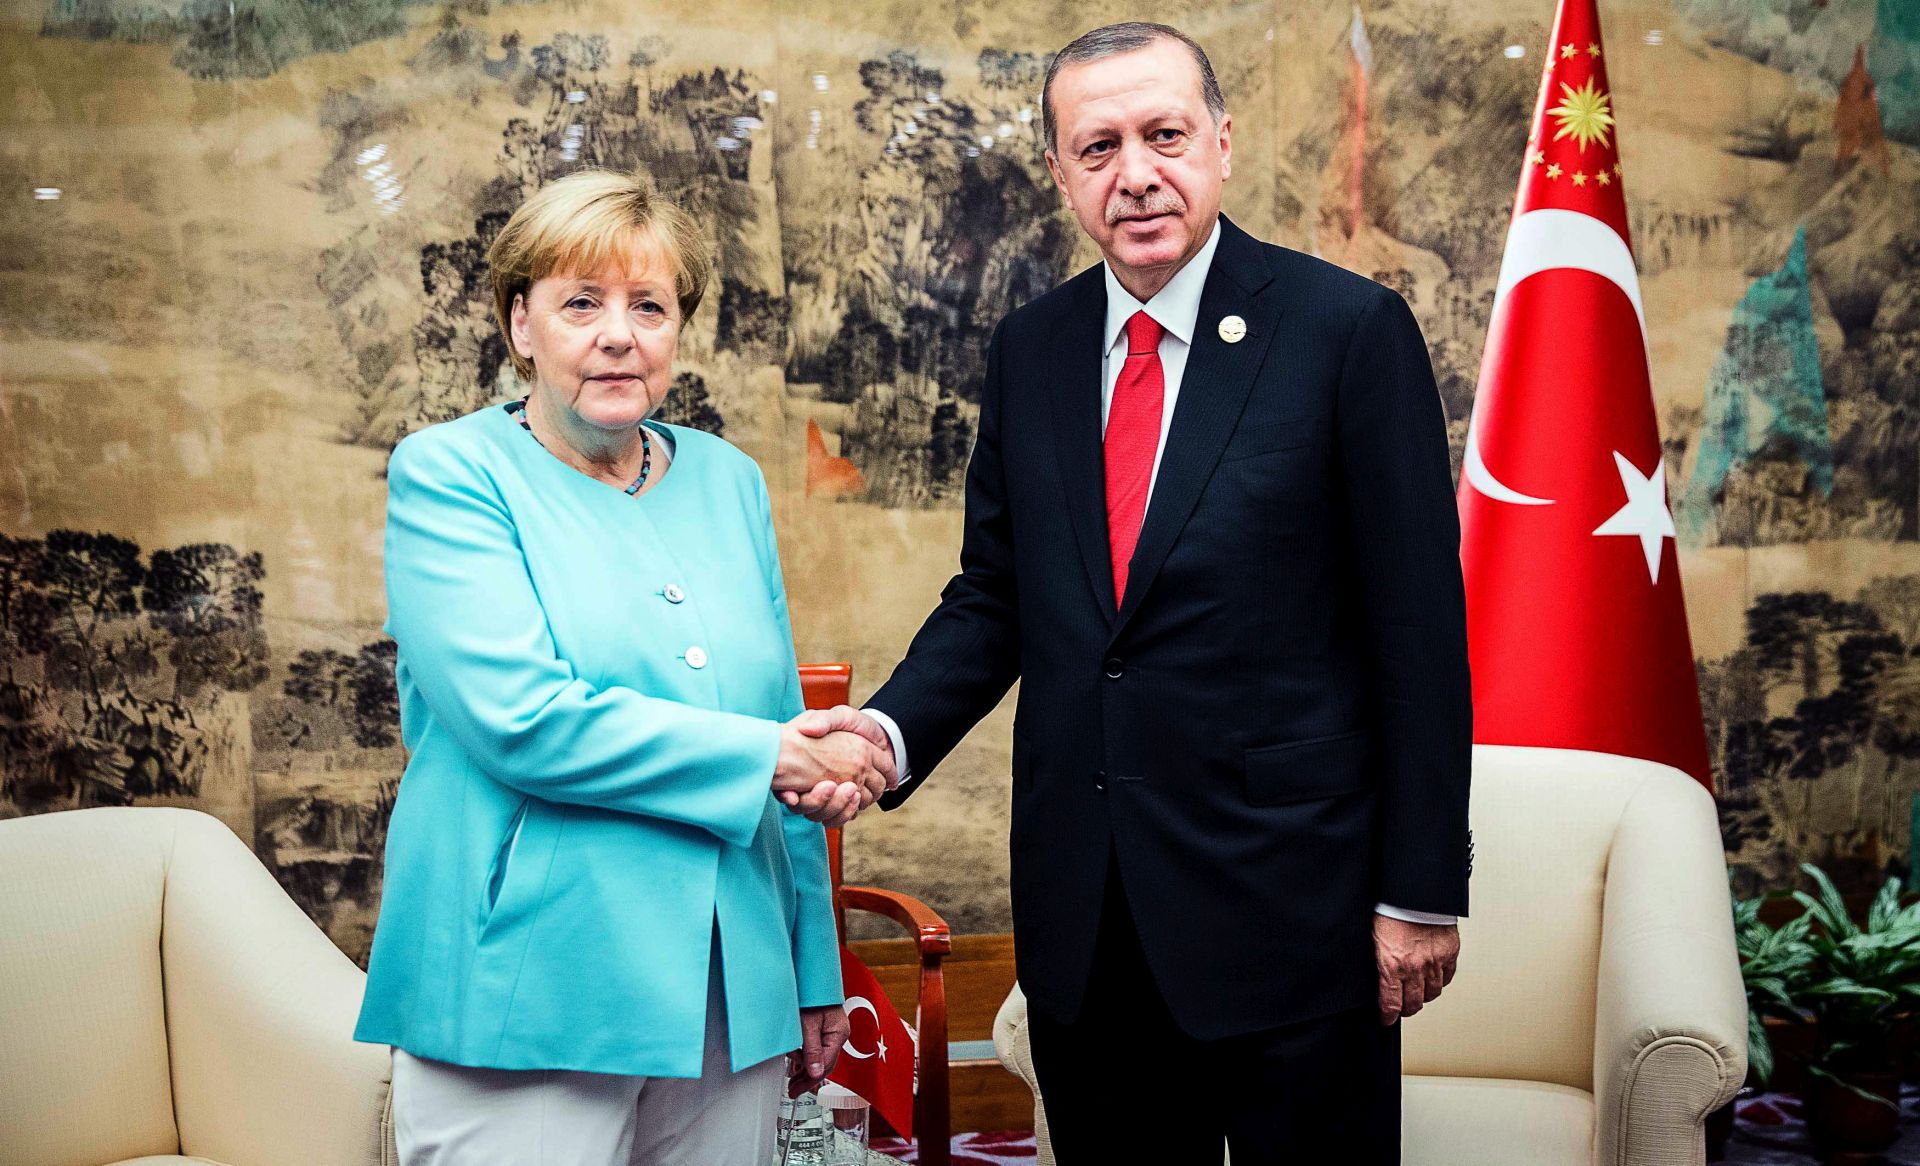 epa05523184 A handout image released by the German Federal Geovernment press service (BPA) shows German Chancellor Angela Merkel (L) and Turkish President Recep Tayyip Erdogan (R) sitting for a bilateral meeting within the framework of the G20 Summit in Hangzhou, China, 04 September 2016. The G20 Summit is held in Hangzhou on 04 to 05 September.  EPA/JSECO DENZEL / HANDOUT  HANDOUT EDITORIAL USE ONLY/NO SALES